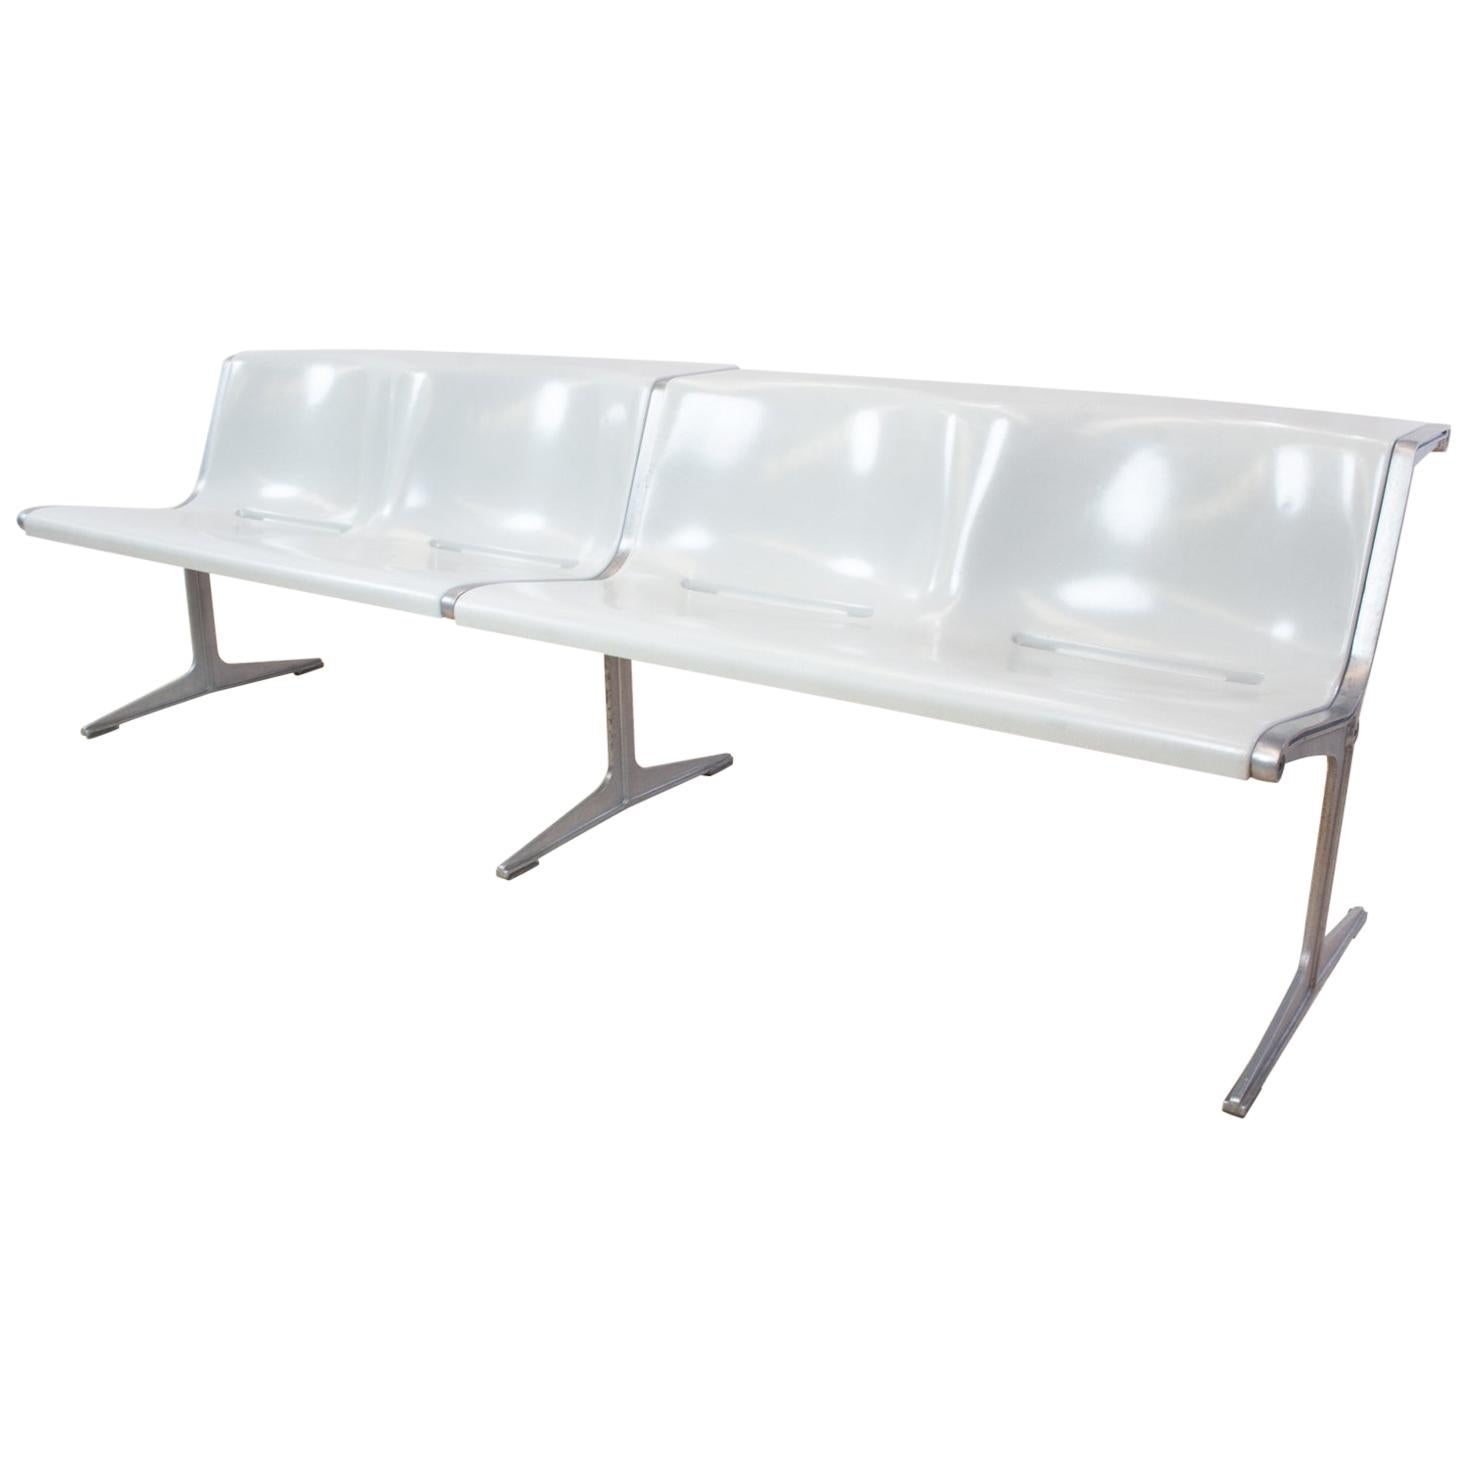 Outdoor Bench Grey Fiberglass and Aluminium by Friso Kramer, Germany, 1967 For Sale